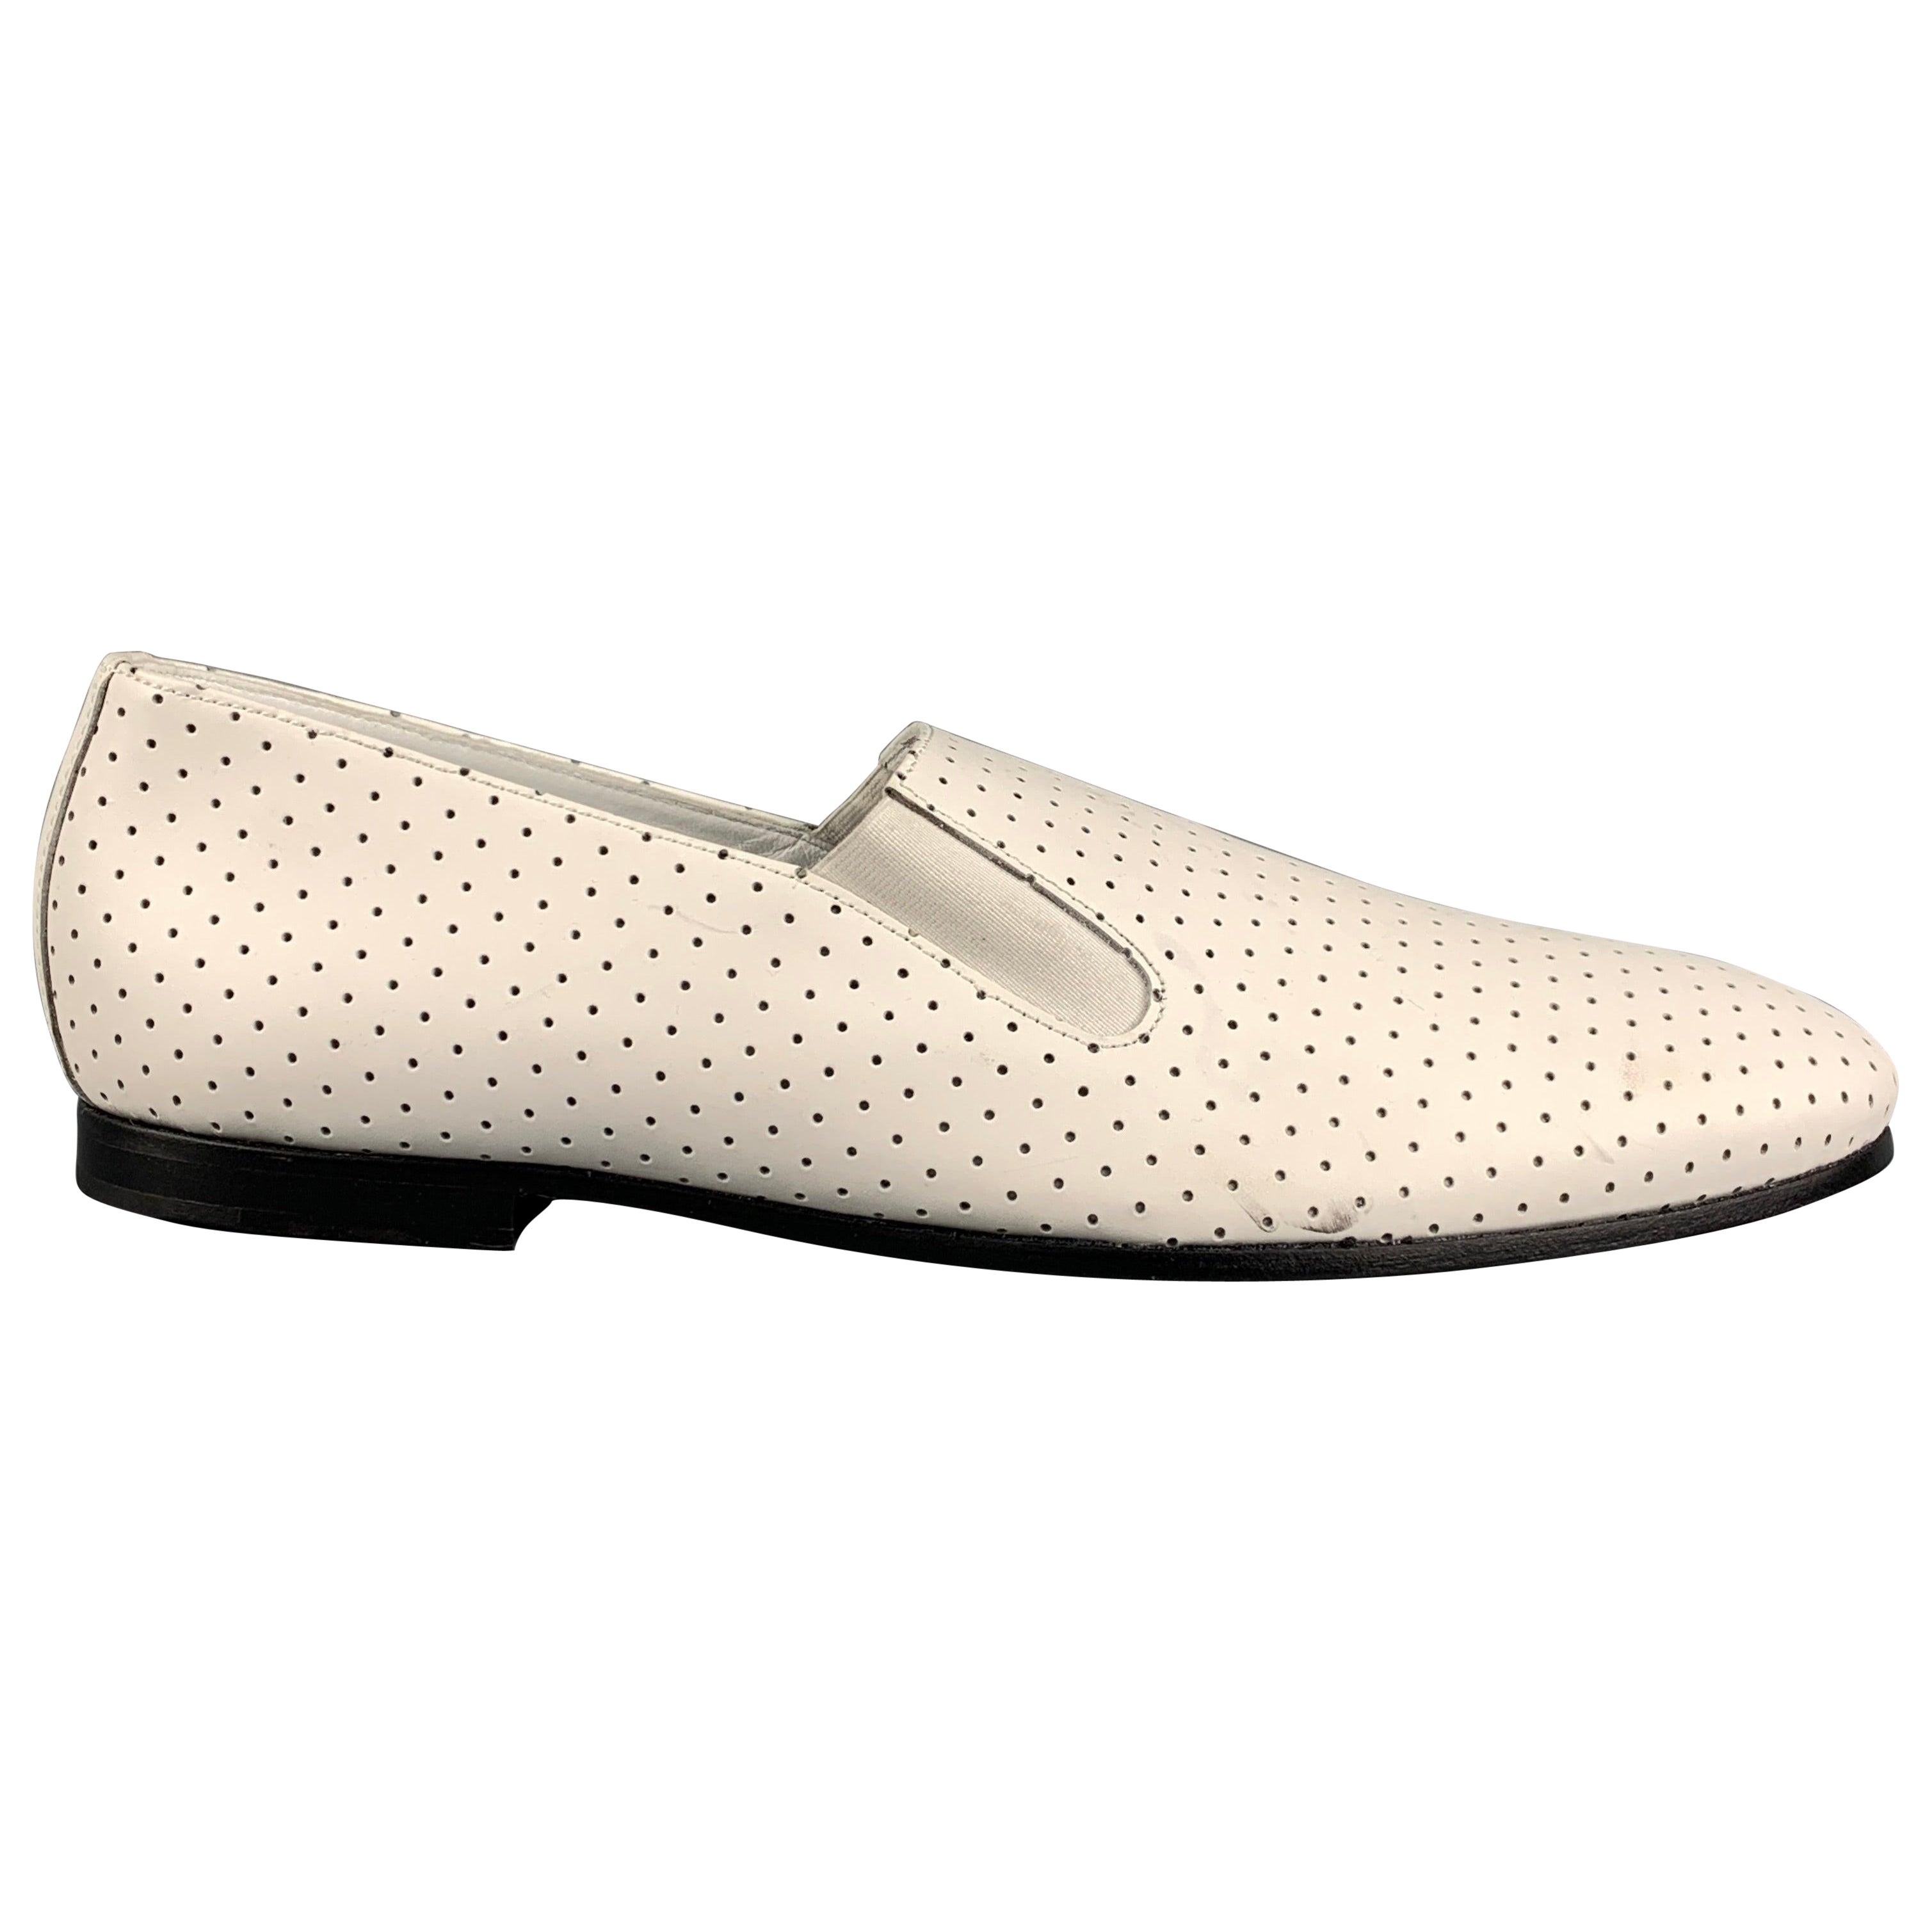 PAUL SMITH Size 10 White Perforated Leather Slip On Loafers For Sale